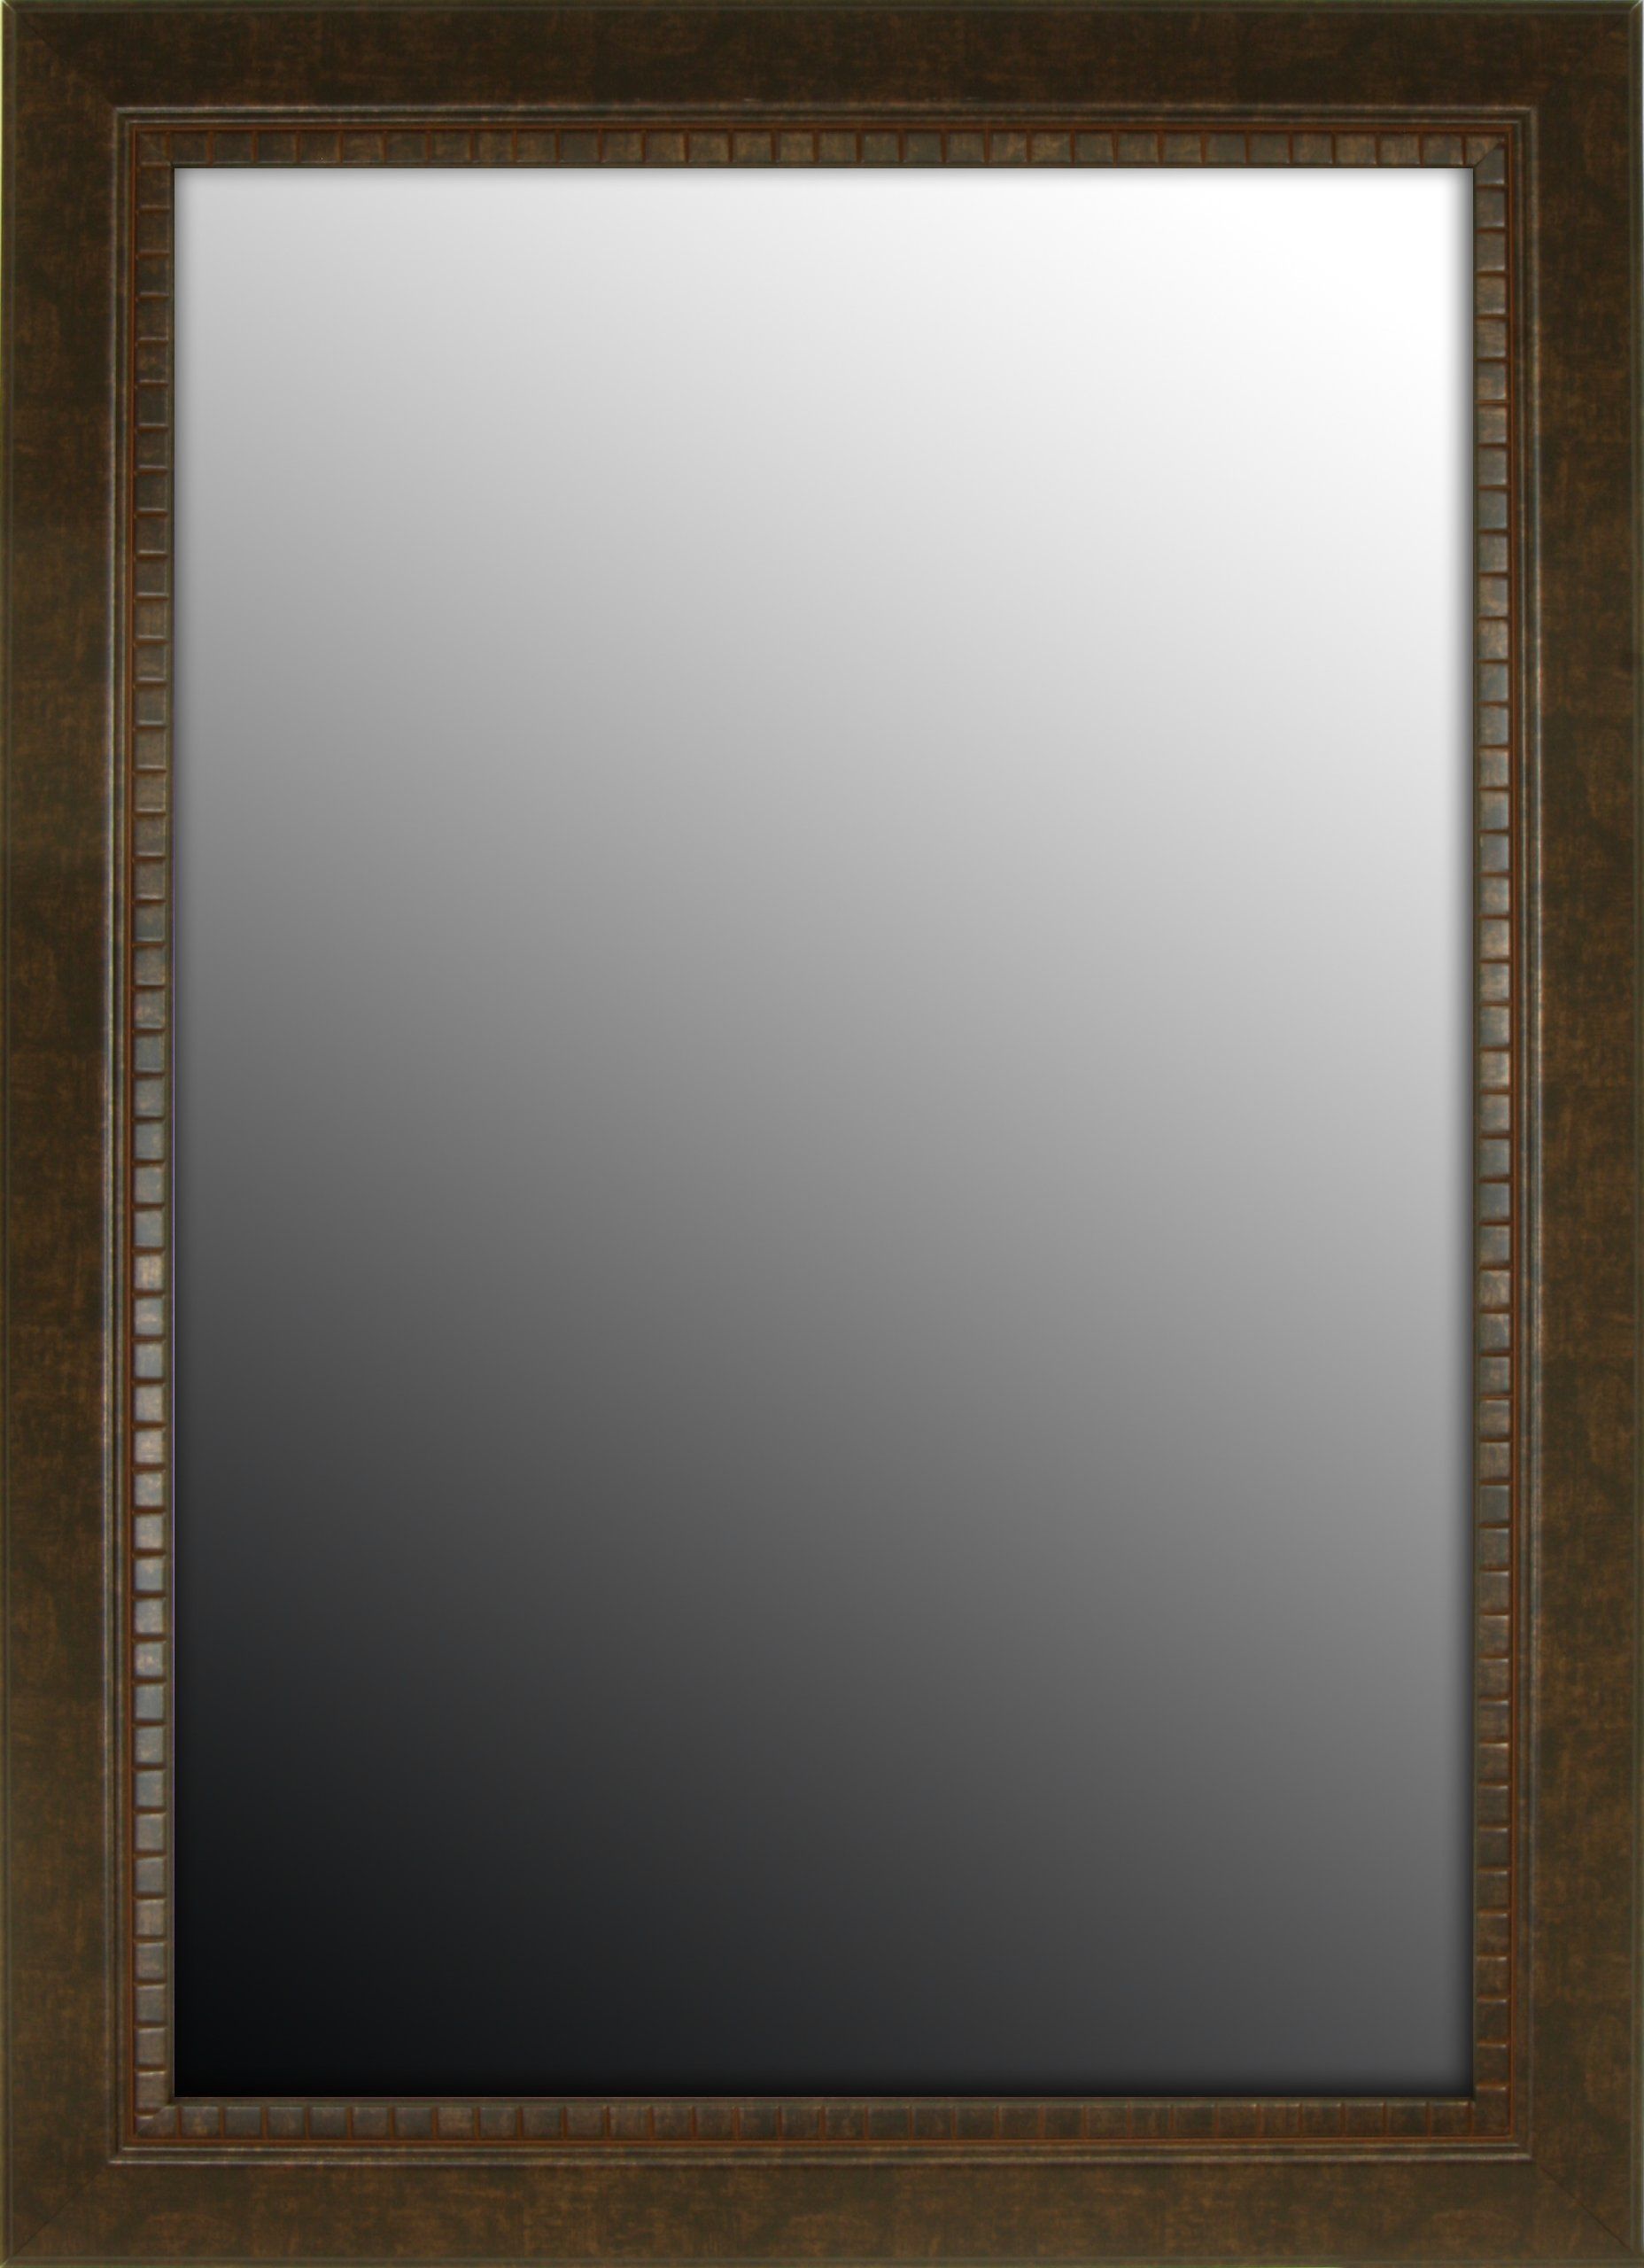 Apple Valley Tuscan Copper Bronze Petite Framed Wall Mirror, 27 Inch In Woven Bronze Metal Wall Mirrors (View 13 of 15)